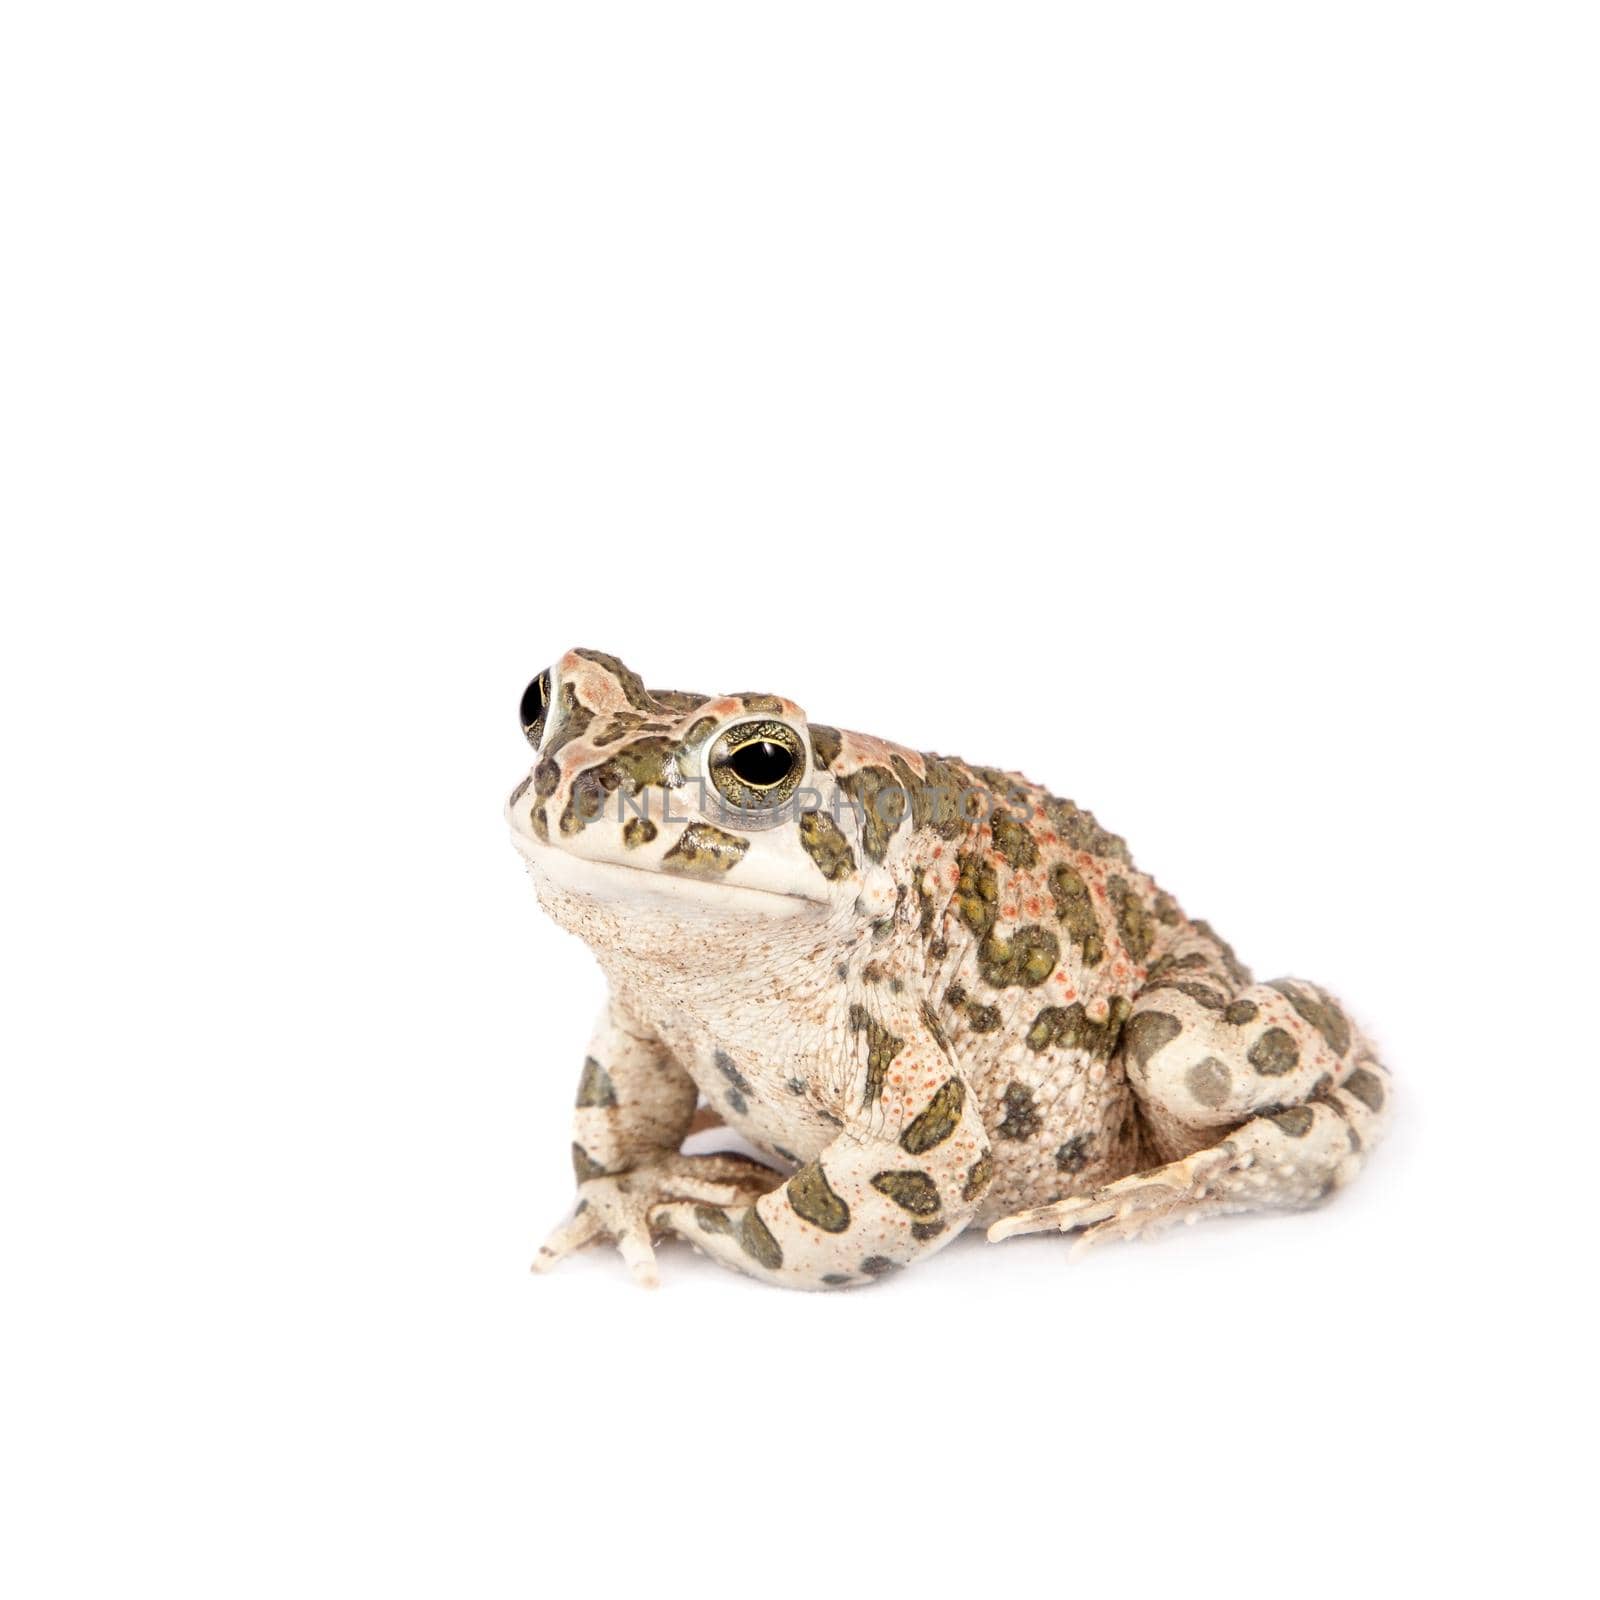 The Egyptian green toad on white by RosaJay